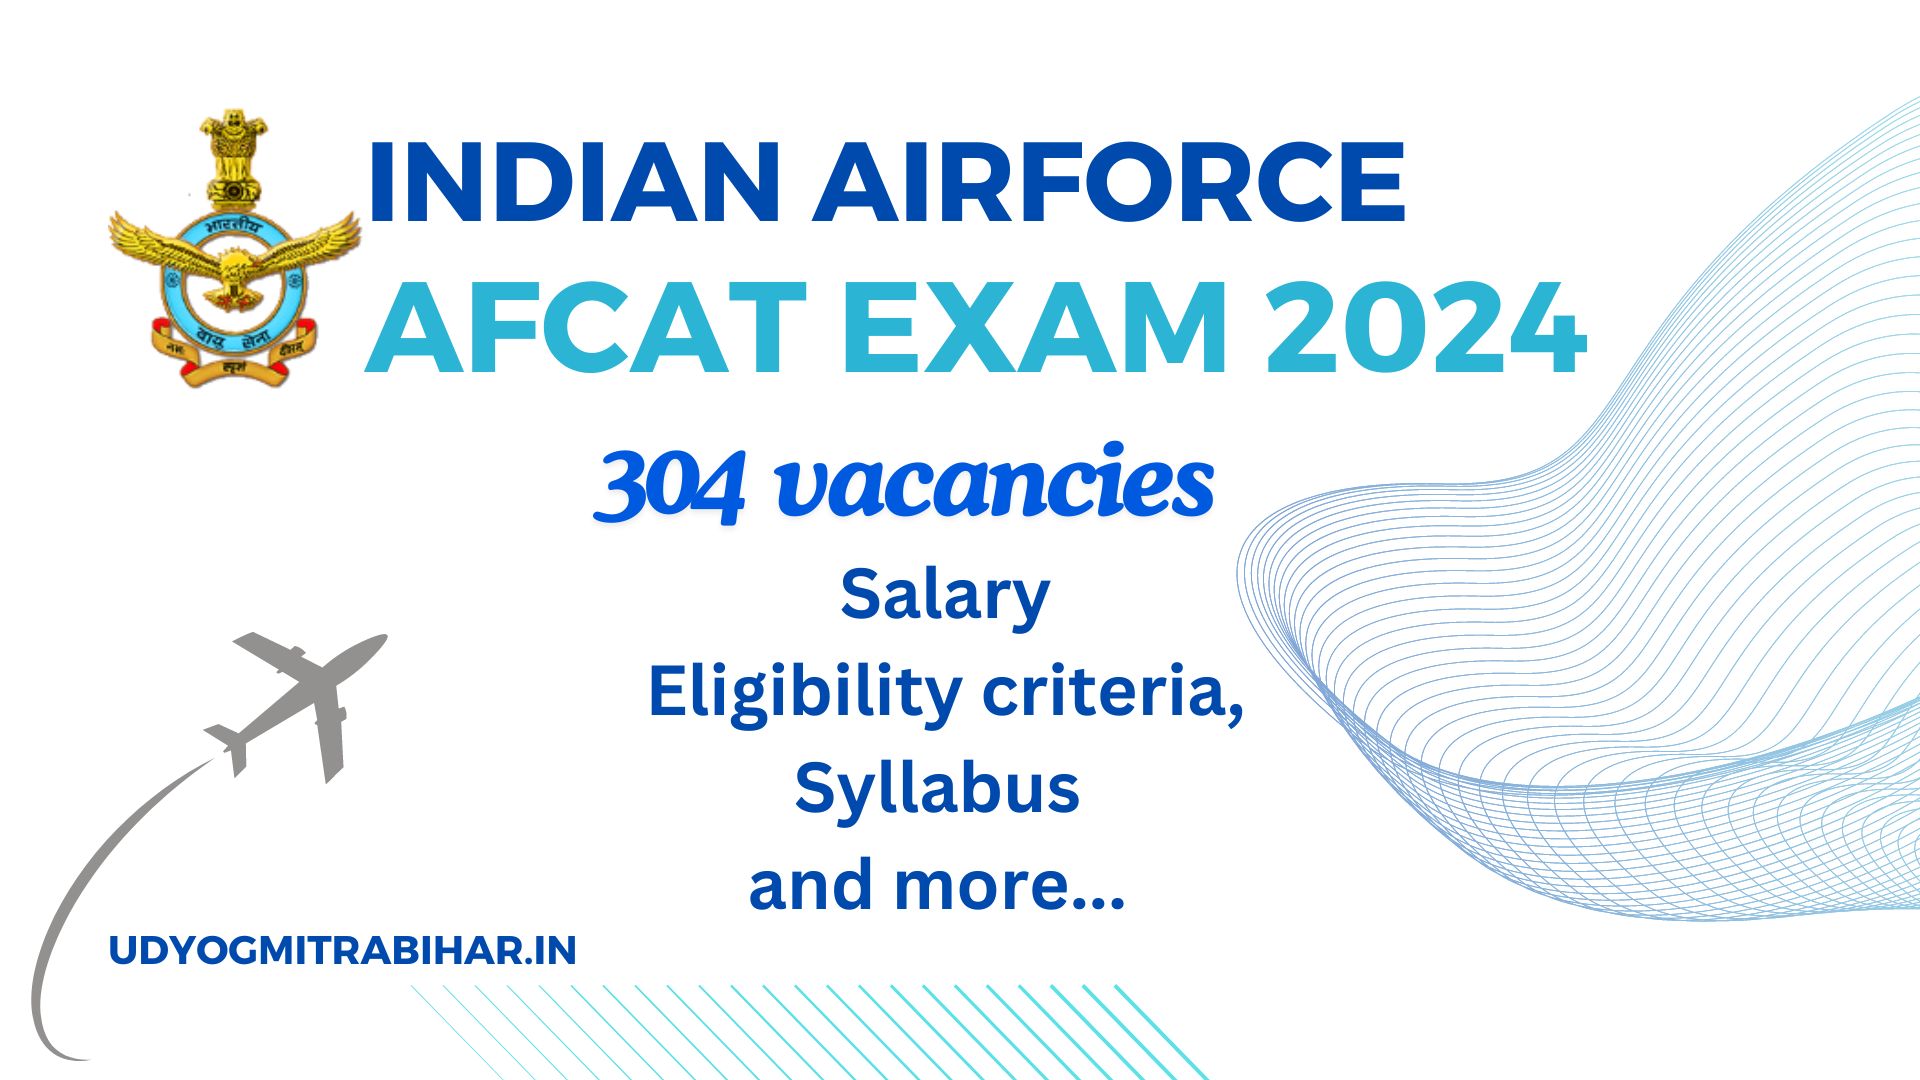 Indian Airforce AFCAT Exam 2024 for 304 Vacancies, Apply Now, Eligibility Criteria, Syllabus, Salary